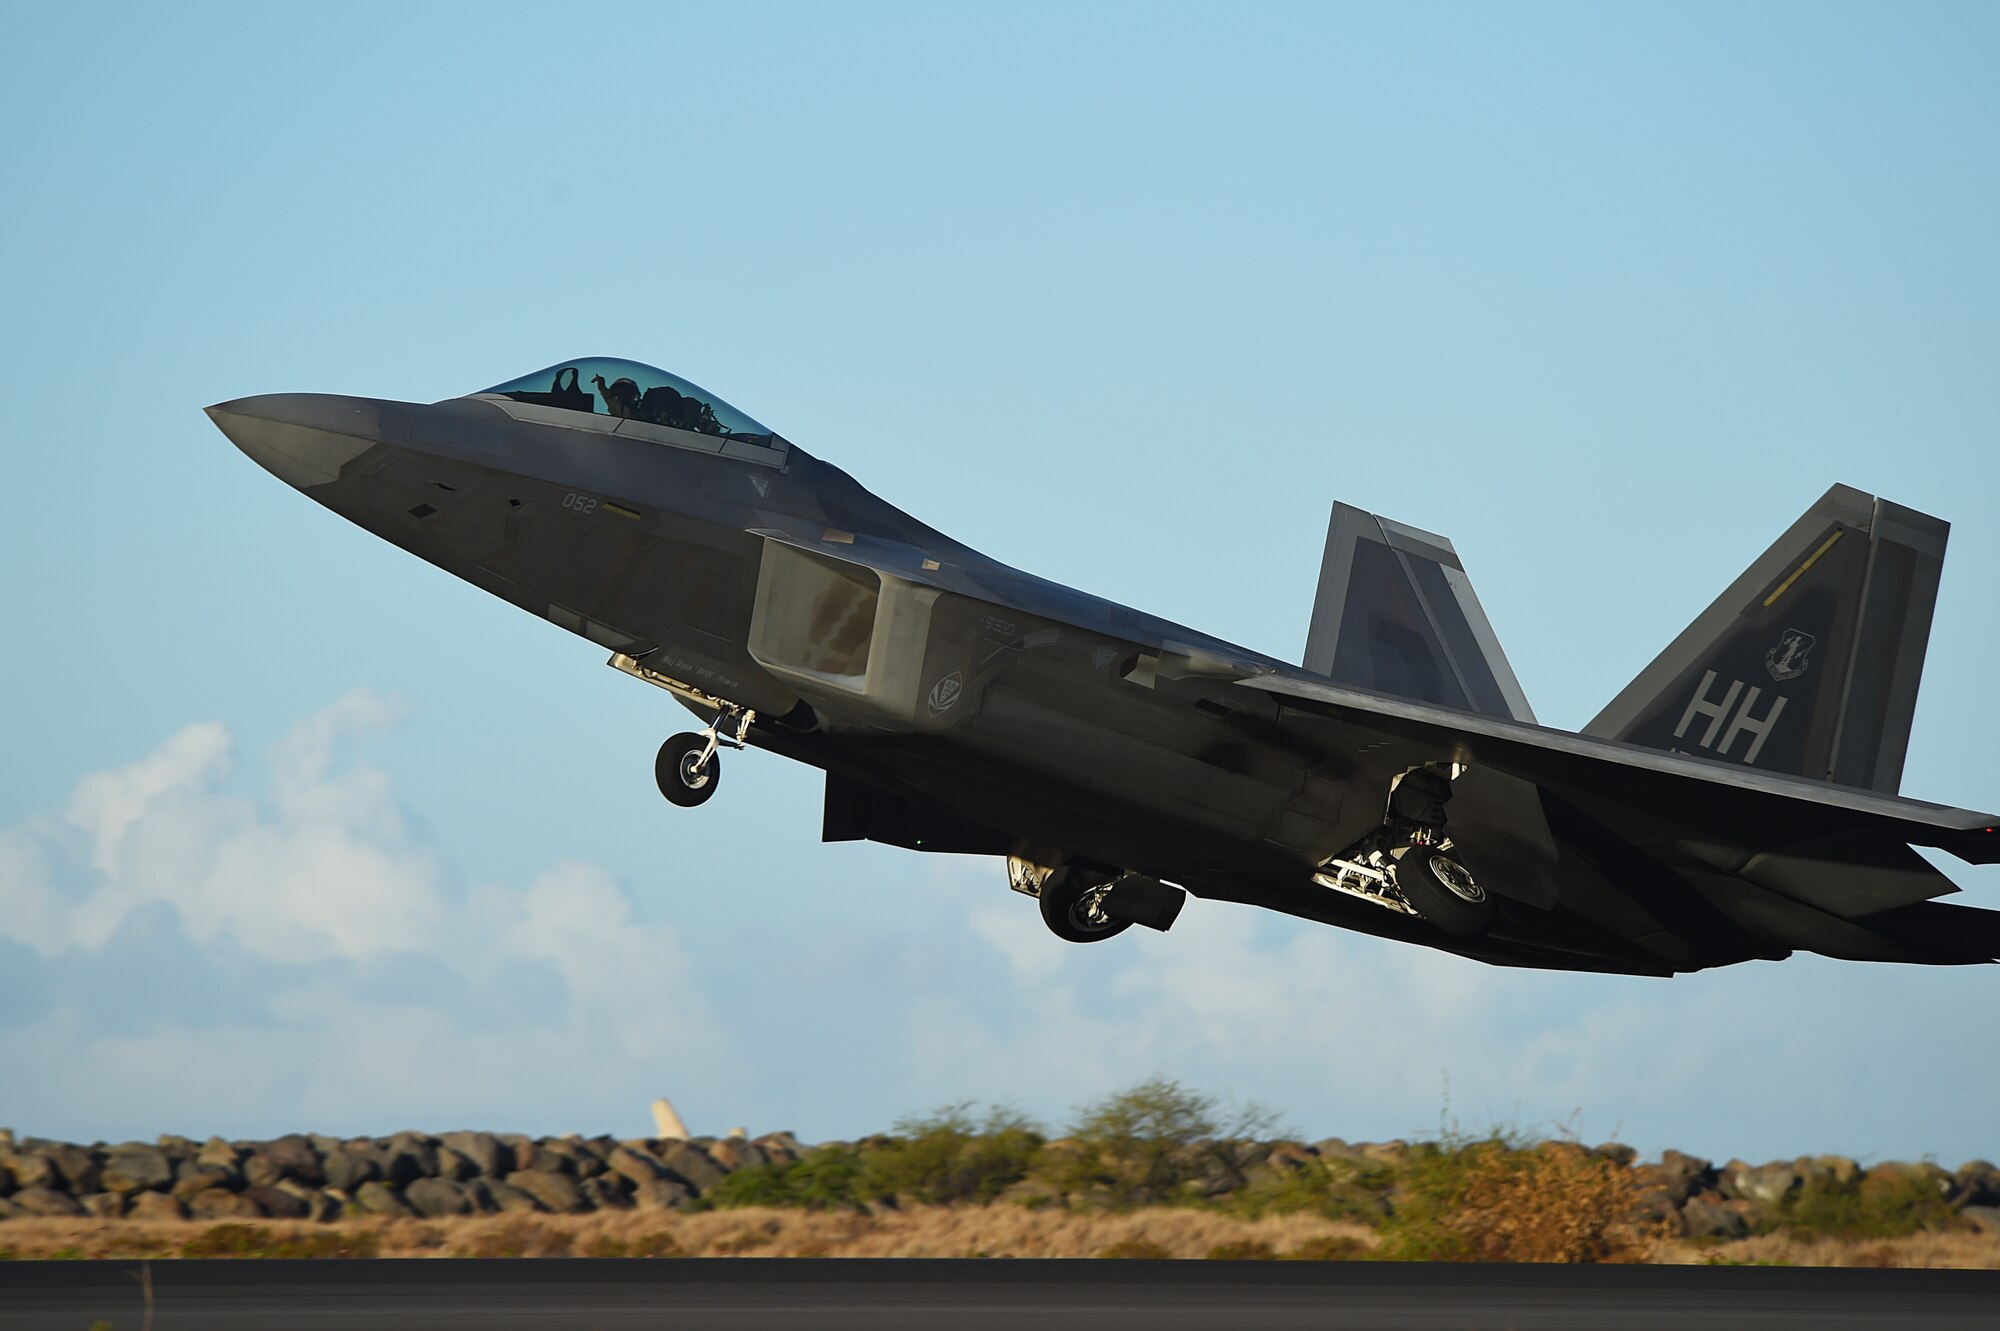 A F-22 Raptor, from the 199th Fighter Squadron, increases altitude shortly after taking off from Joint Base Pearl Harbor-Hickam, Hawaii, June 6, 2015. F-22 Pilots from the Hawaii Air National Guard’s 199th Fighter Squadron and the 19th Fighter Squadron teamed up with maintenance Airmen from the 154th Wing and 15th Maintenance Group to launch and recover 62 Raptors in a day. The previous record was 46 sorties in one day with 14 aircraft, this recorded was broken using only 12 of the 18 aircraft in the smallest F-22 squadron in the Air Force. (U.S. Air Force photo by Tech. Sgt. Aaron Oelrich/Released)   